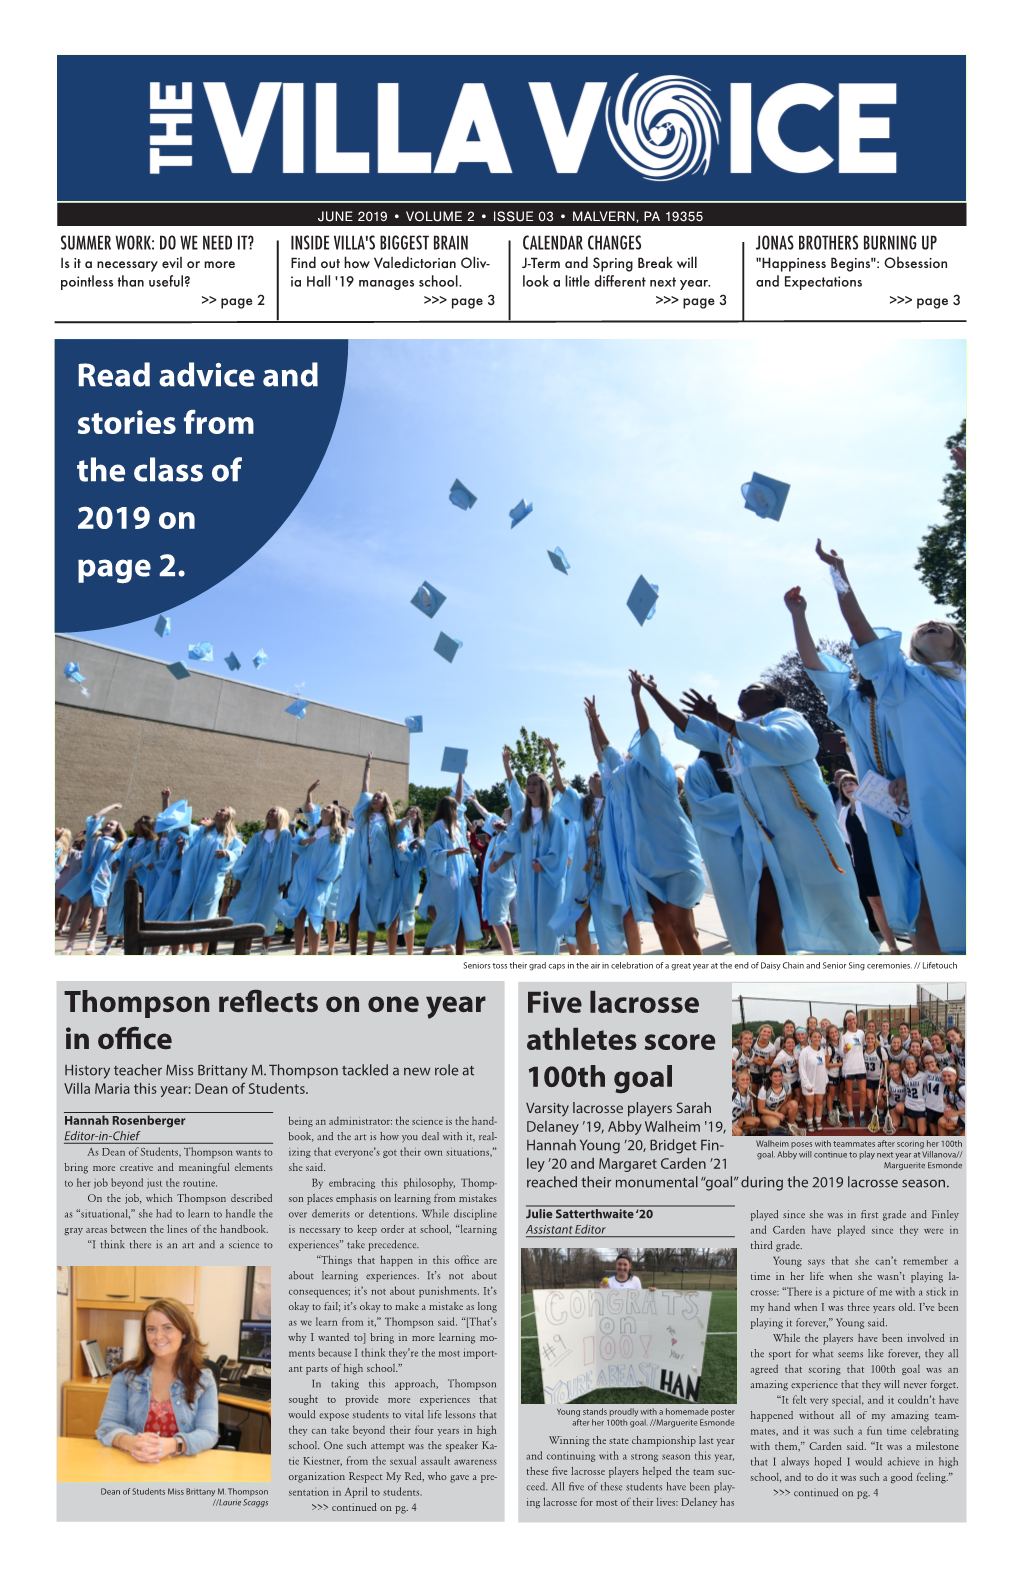 Read Advice and Stories from the Class of 2019 on Page 2